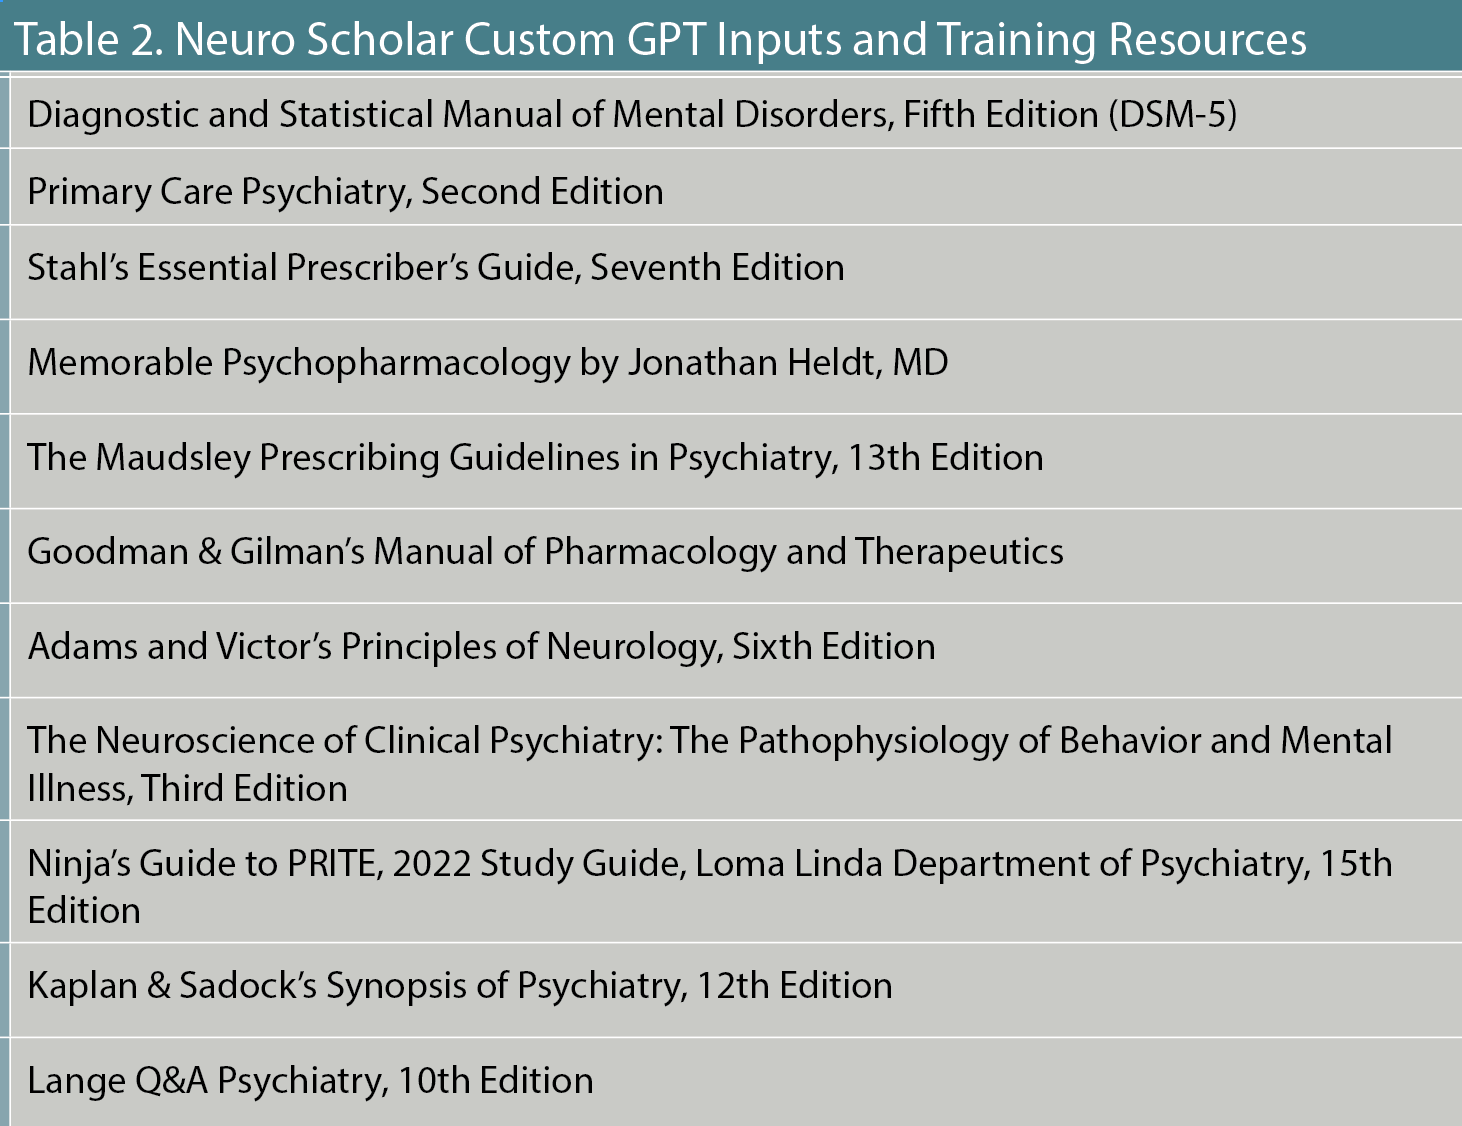 Table 2. Neuro Scholar Custom GPT Inputs and Training Resources